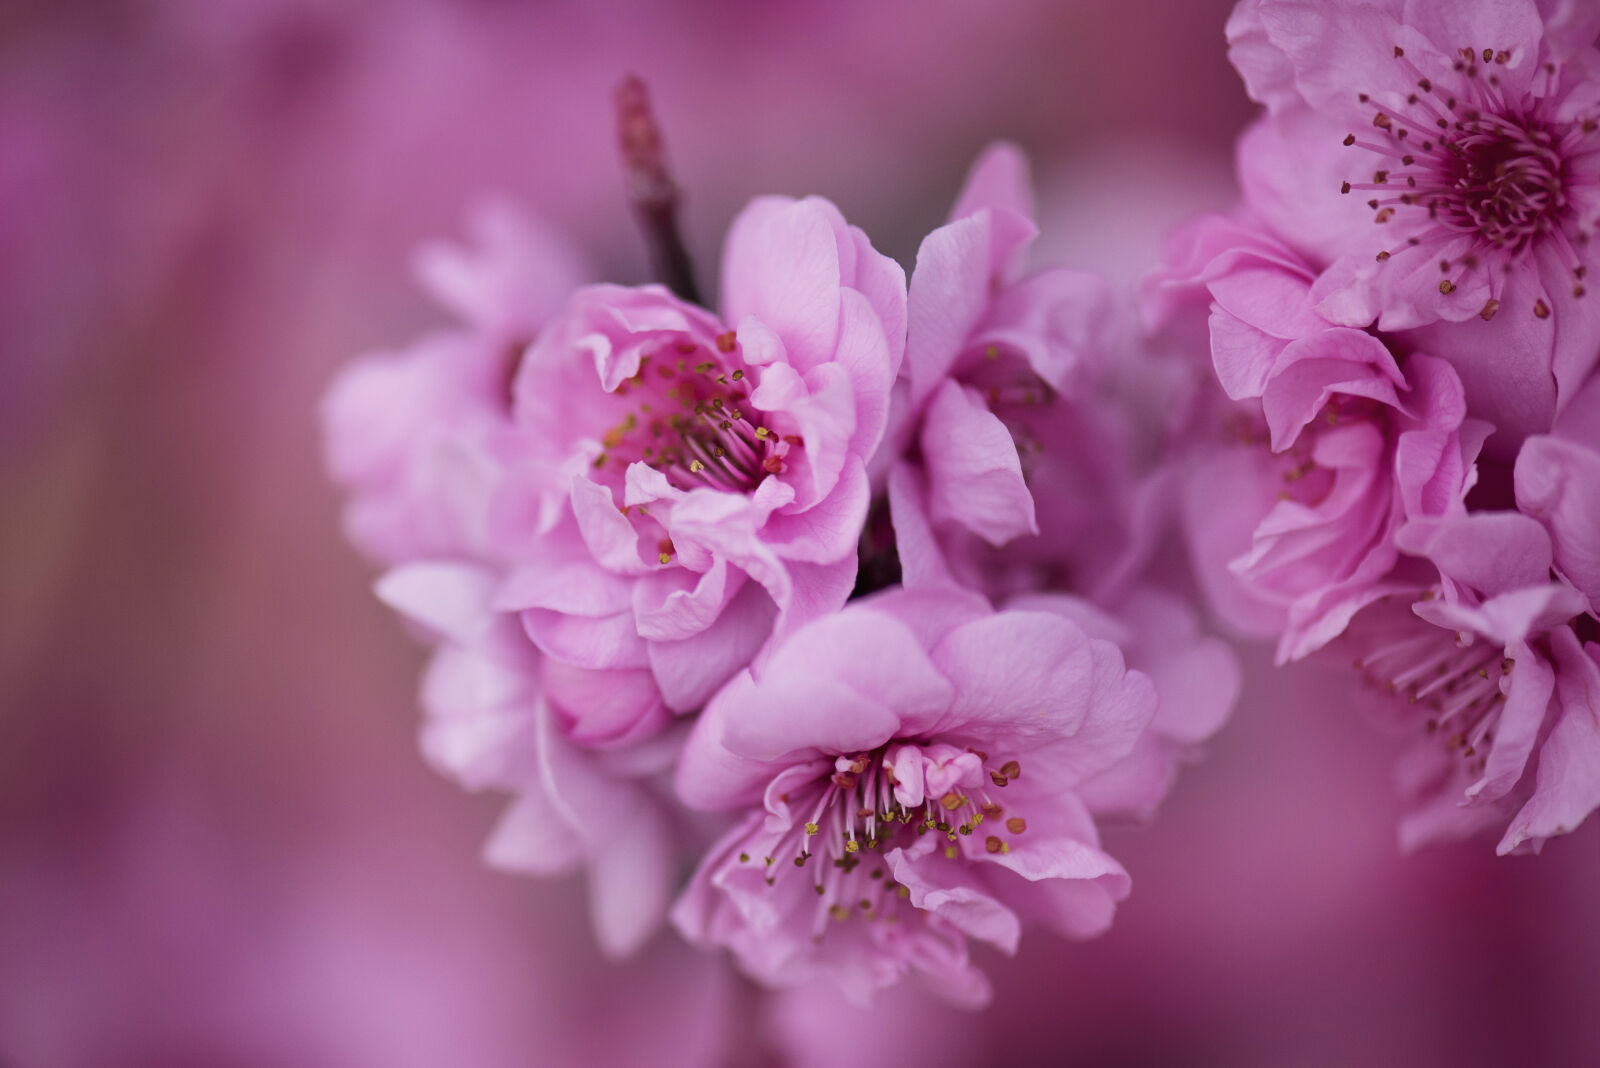 Nikon D810 sample photo. Bloom, blooming, blossom, blur photography